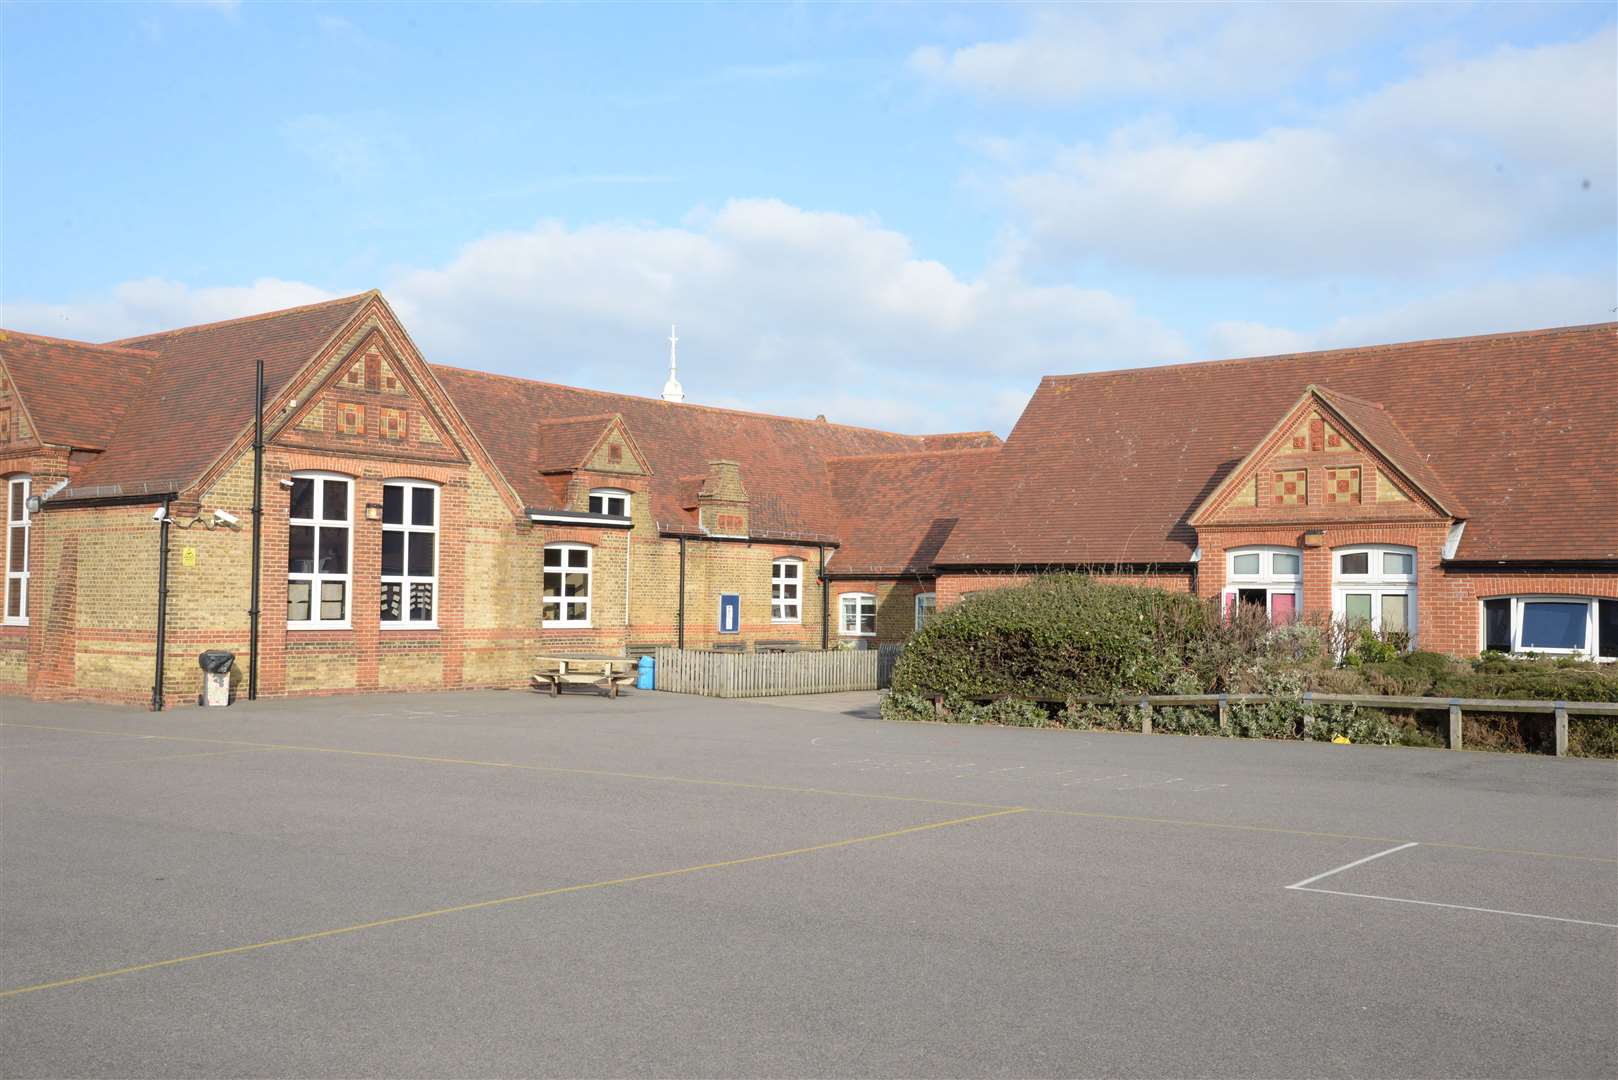 Police were called to Herne Bay Junior School in King's Road yesterday morning